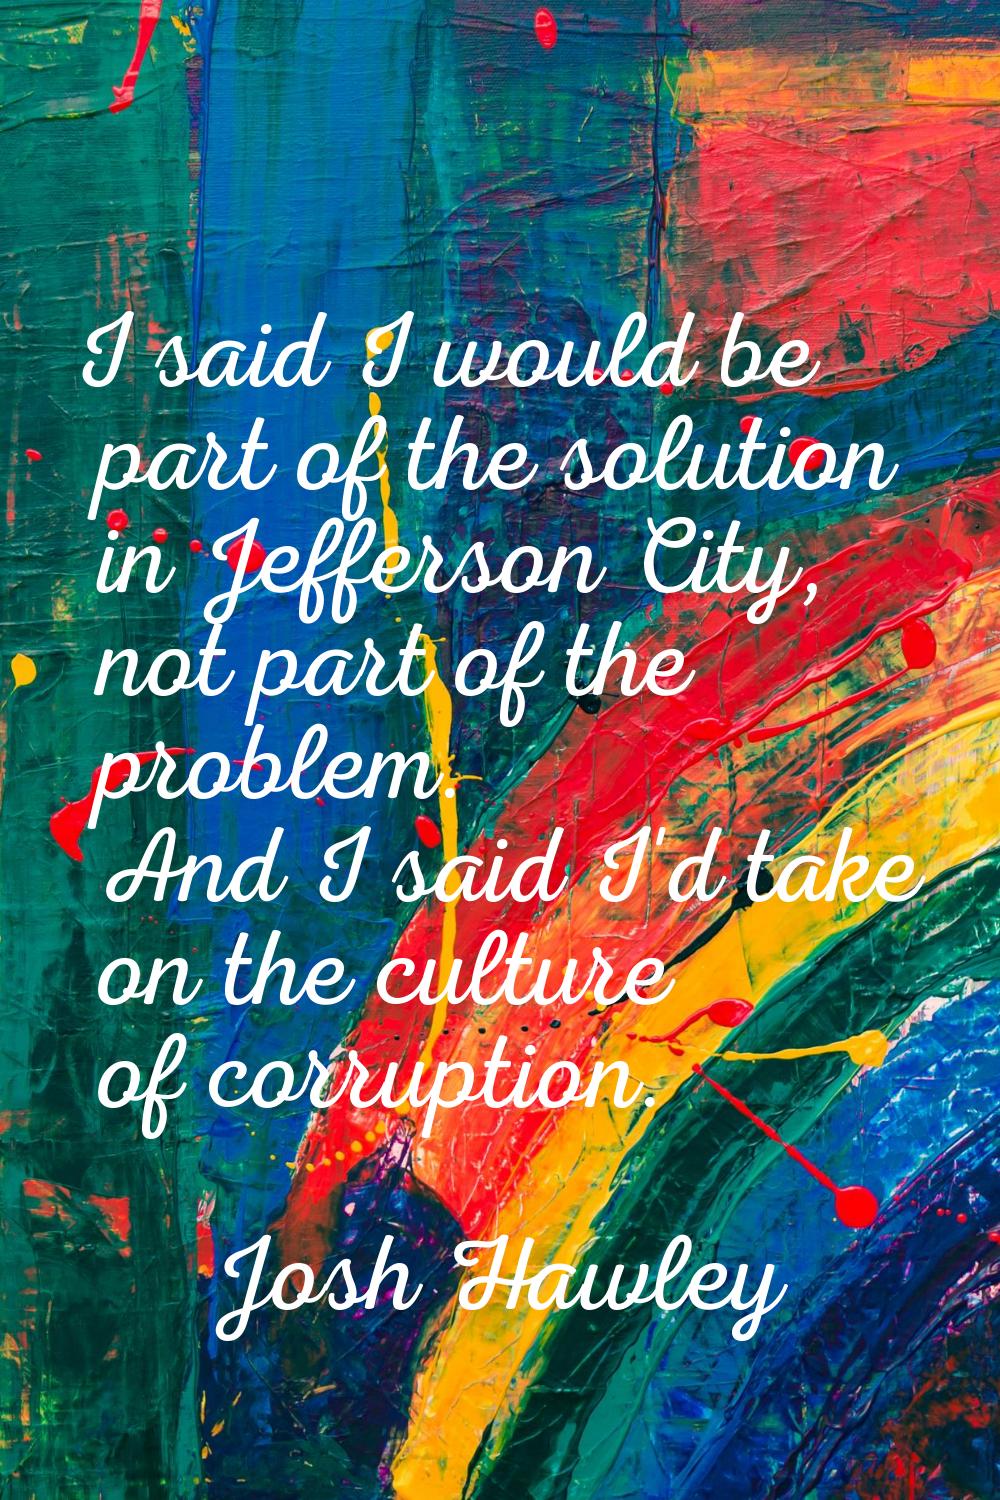 I said I would be part of the solution in Jefferson City, not part of the problem. And I said I'd t